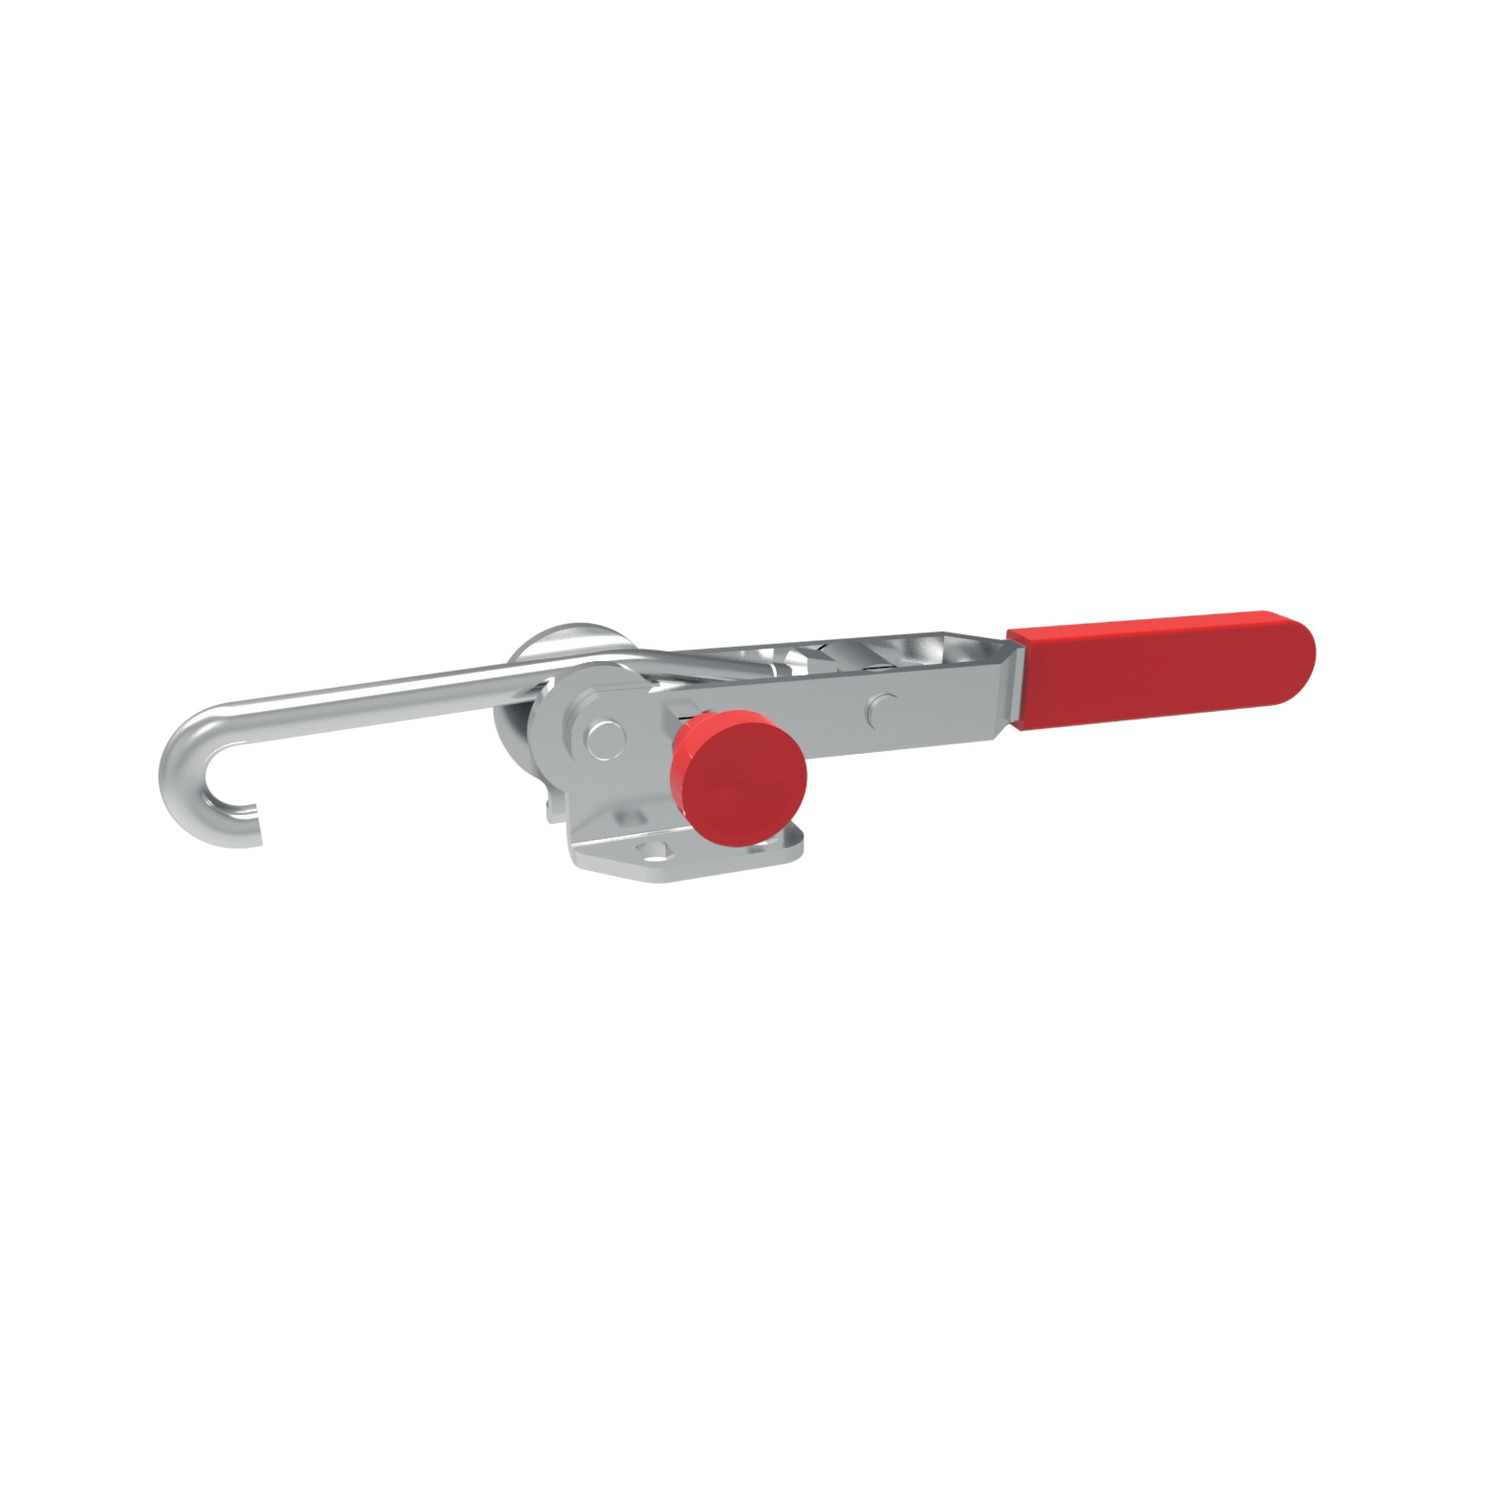 41600.W0003 Hook Clamp With Safety Lever Zinc plated steel - 3 - 3 - 7,1 - 5,5